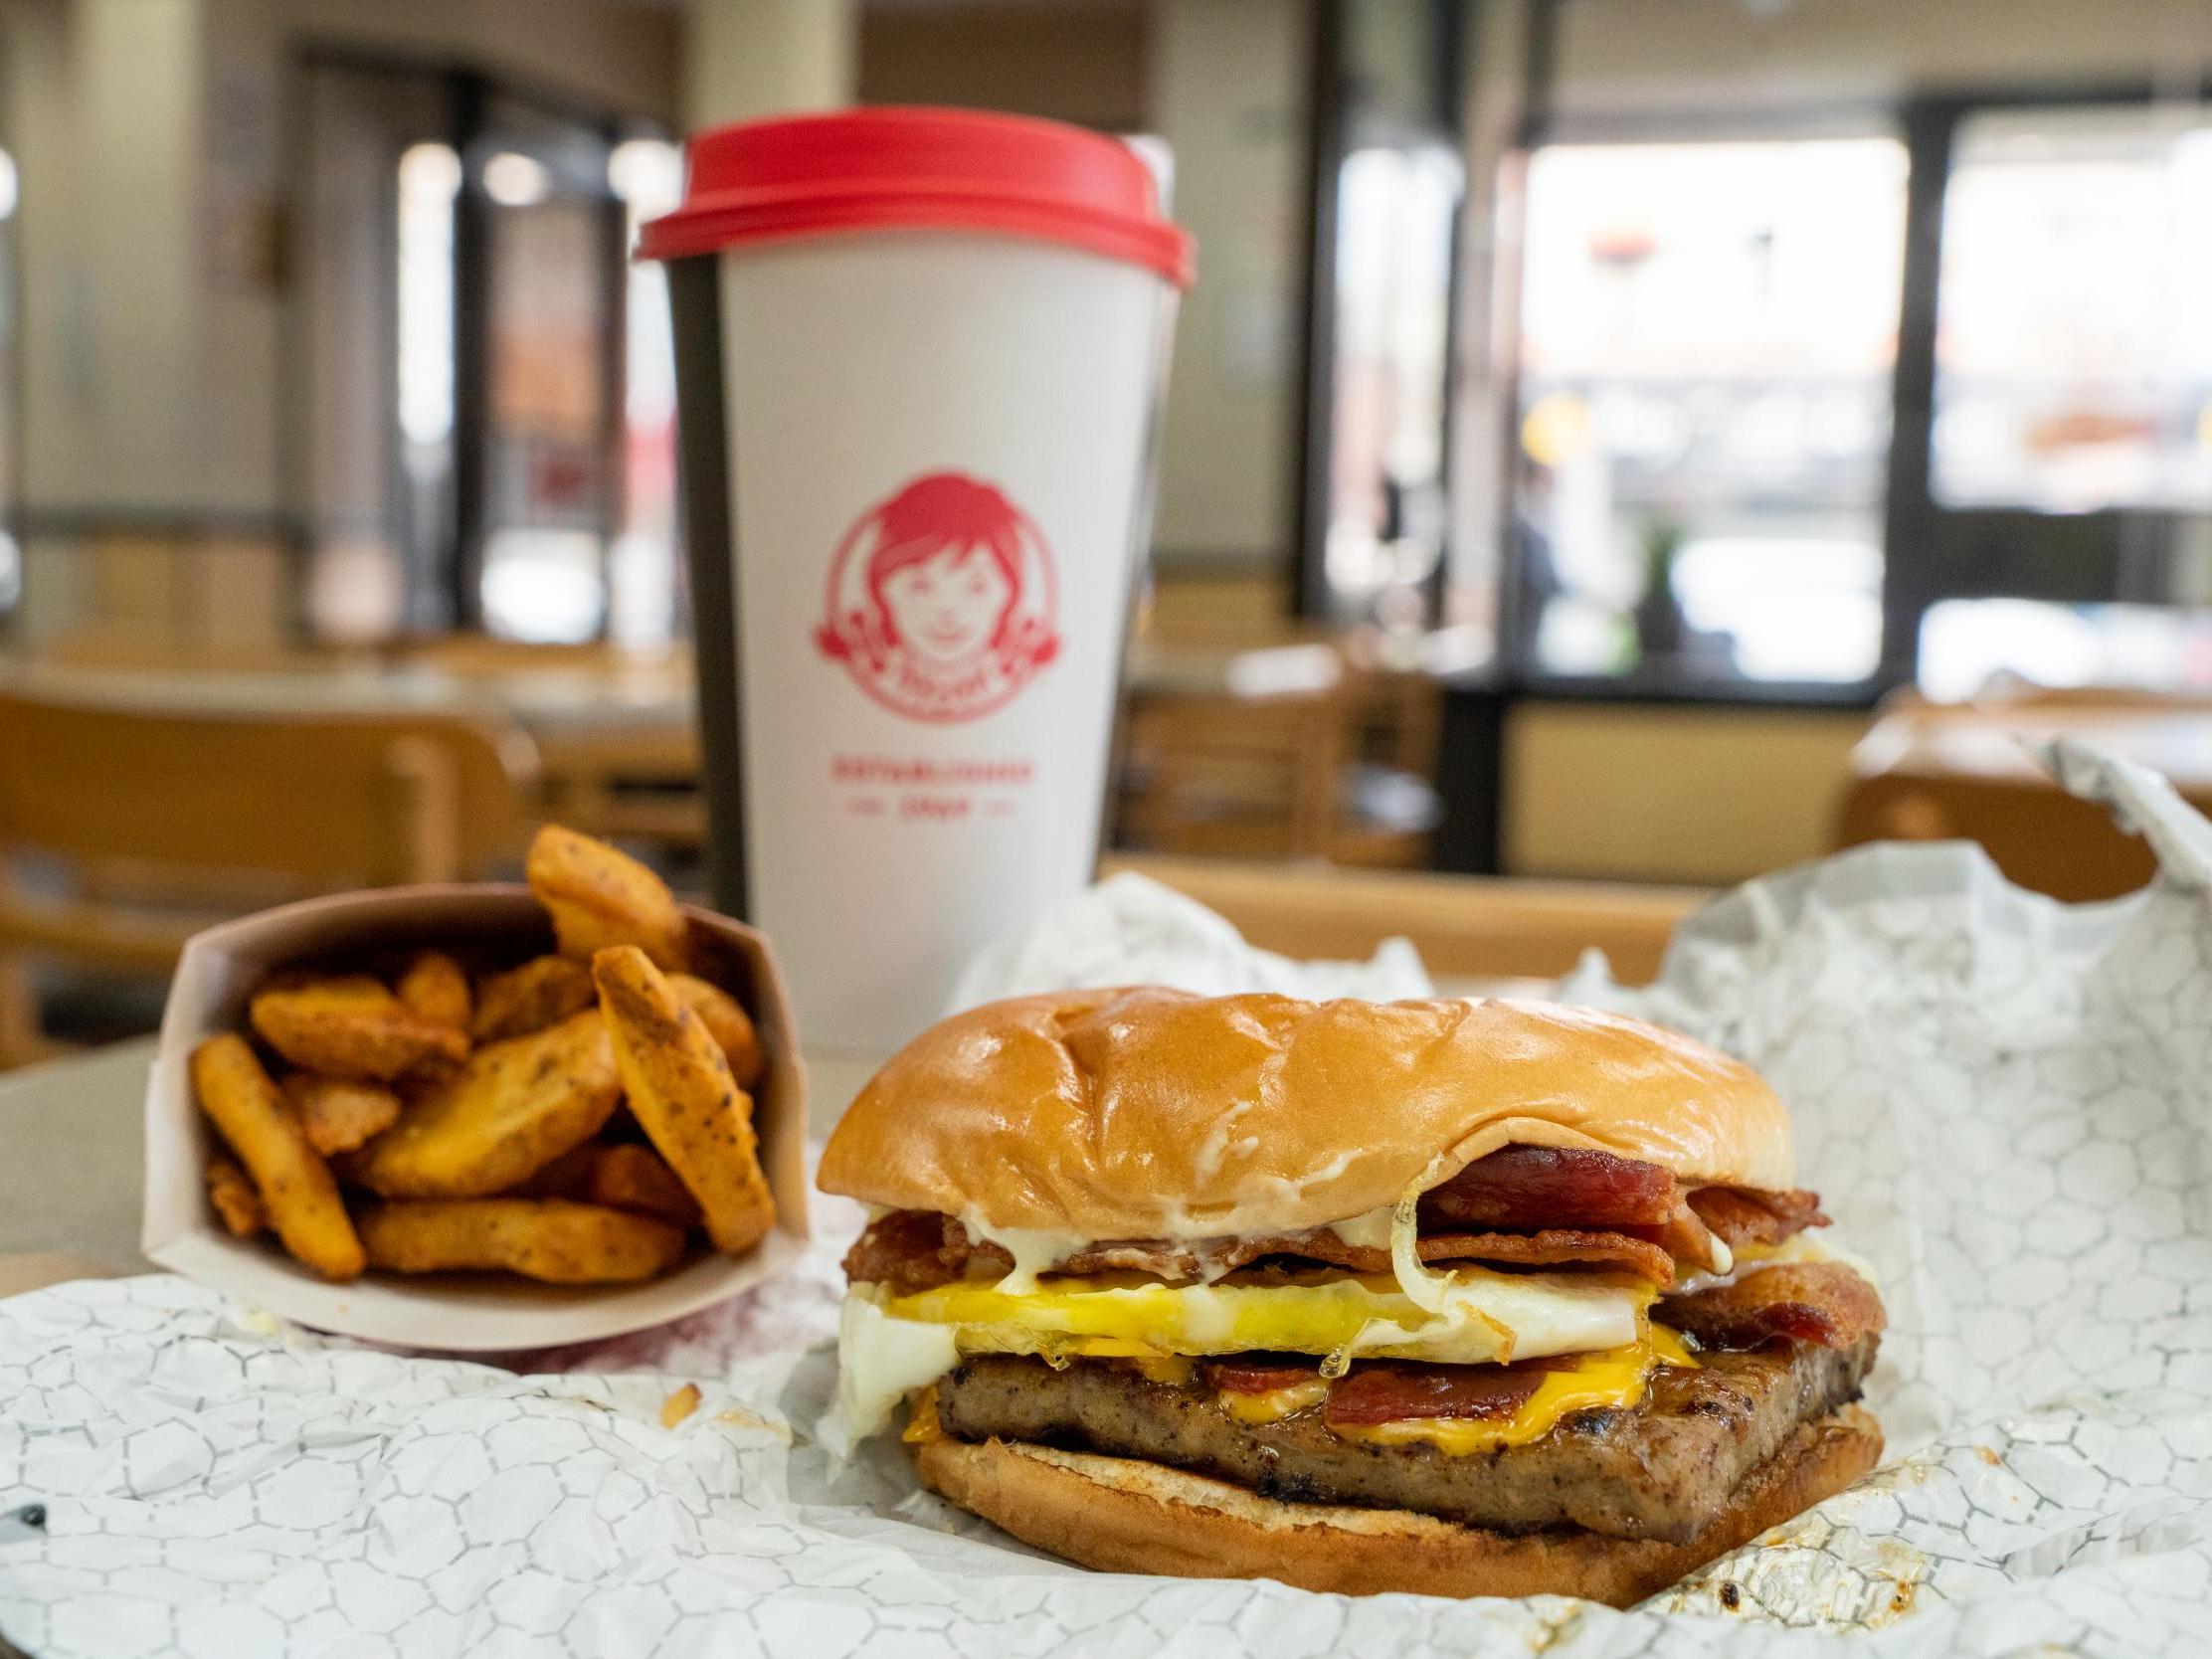 Wendy’s is introducing ‘dynamic pricing’